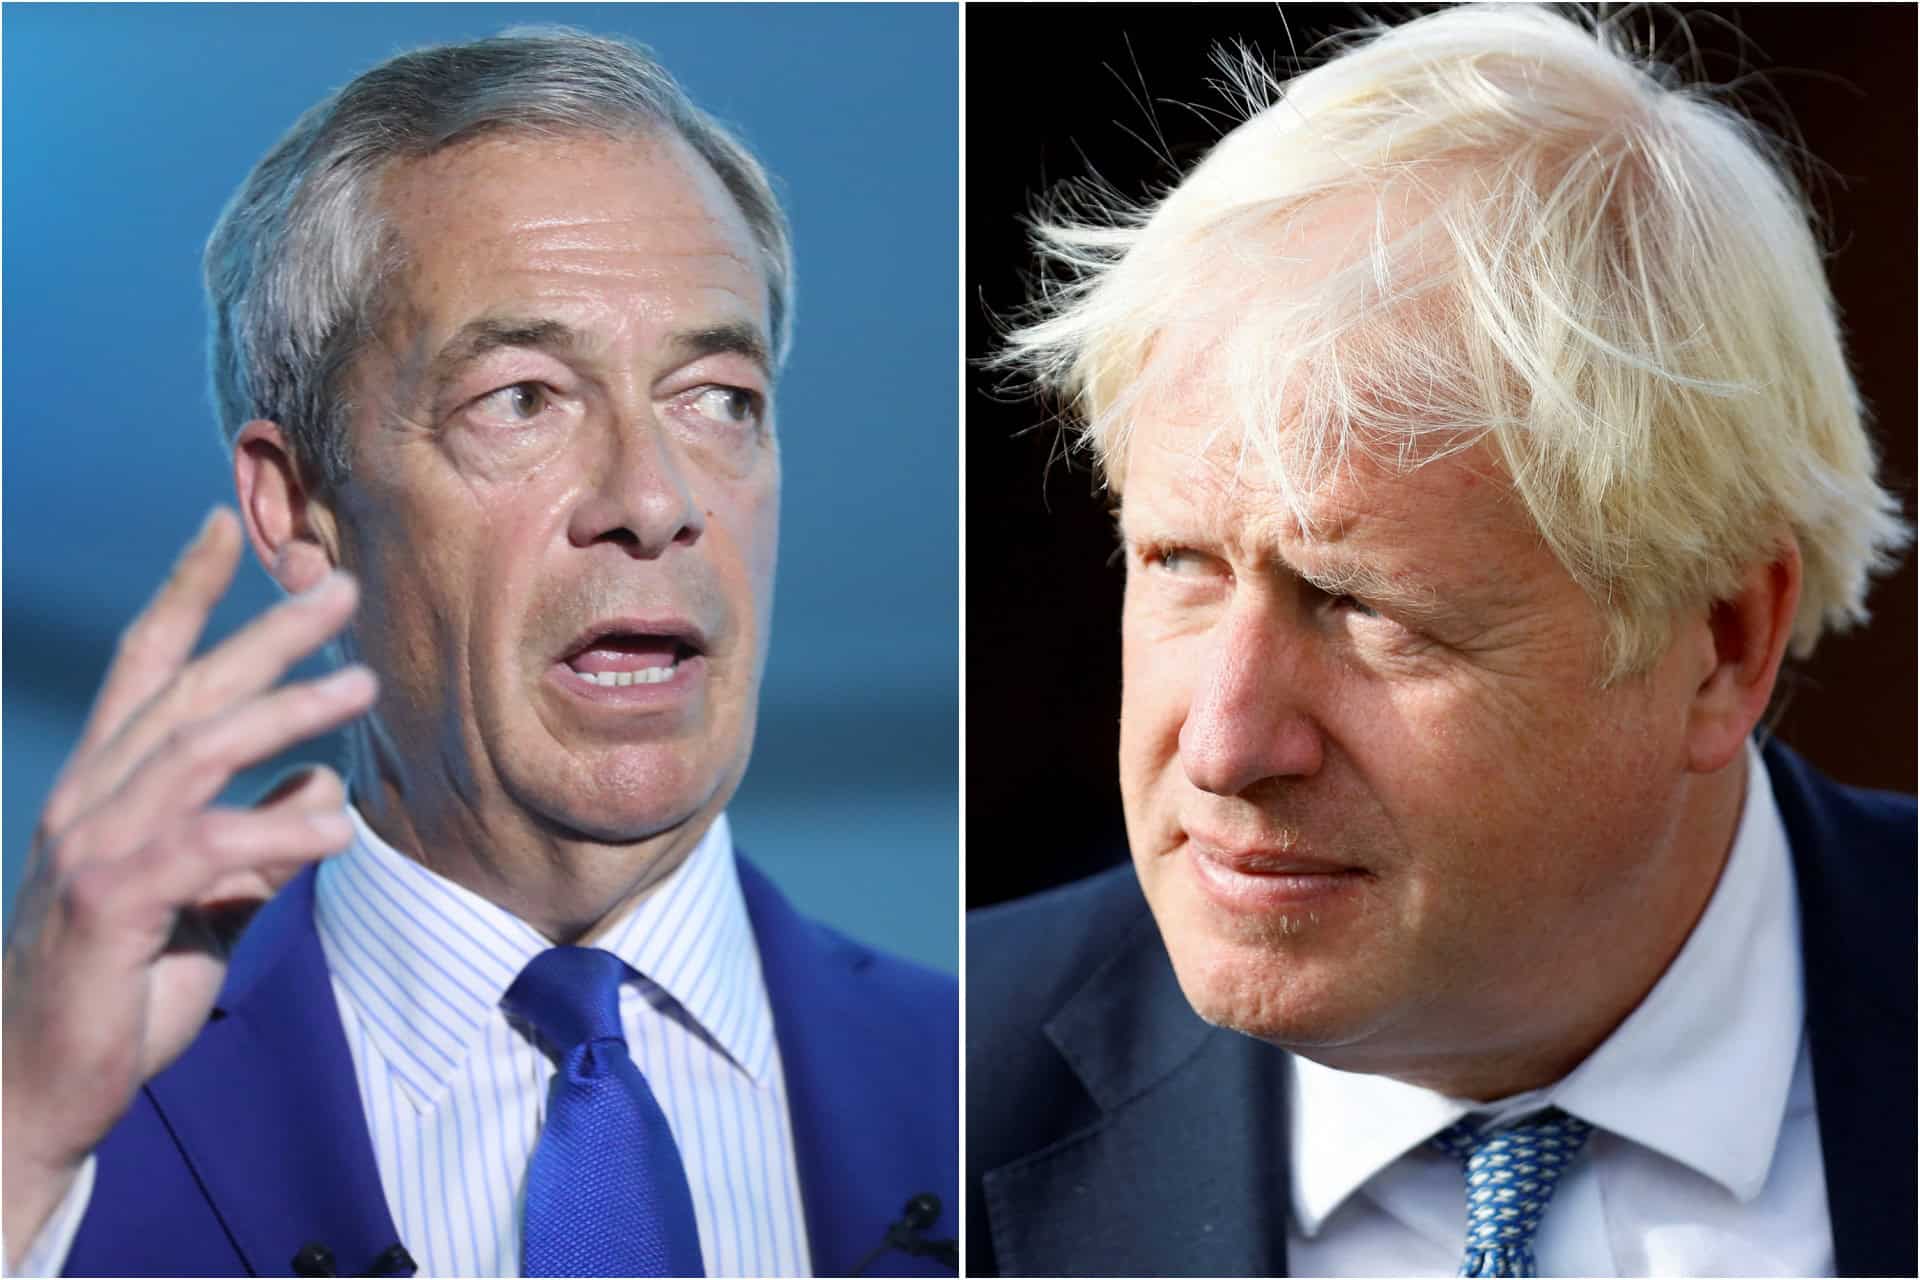 Johnson lashes out at Farage over ‘morally repugnant’ Ukraine comments